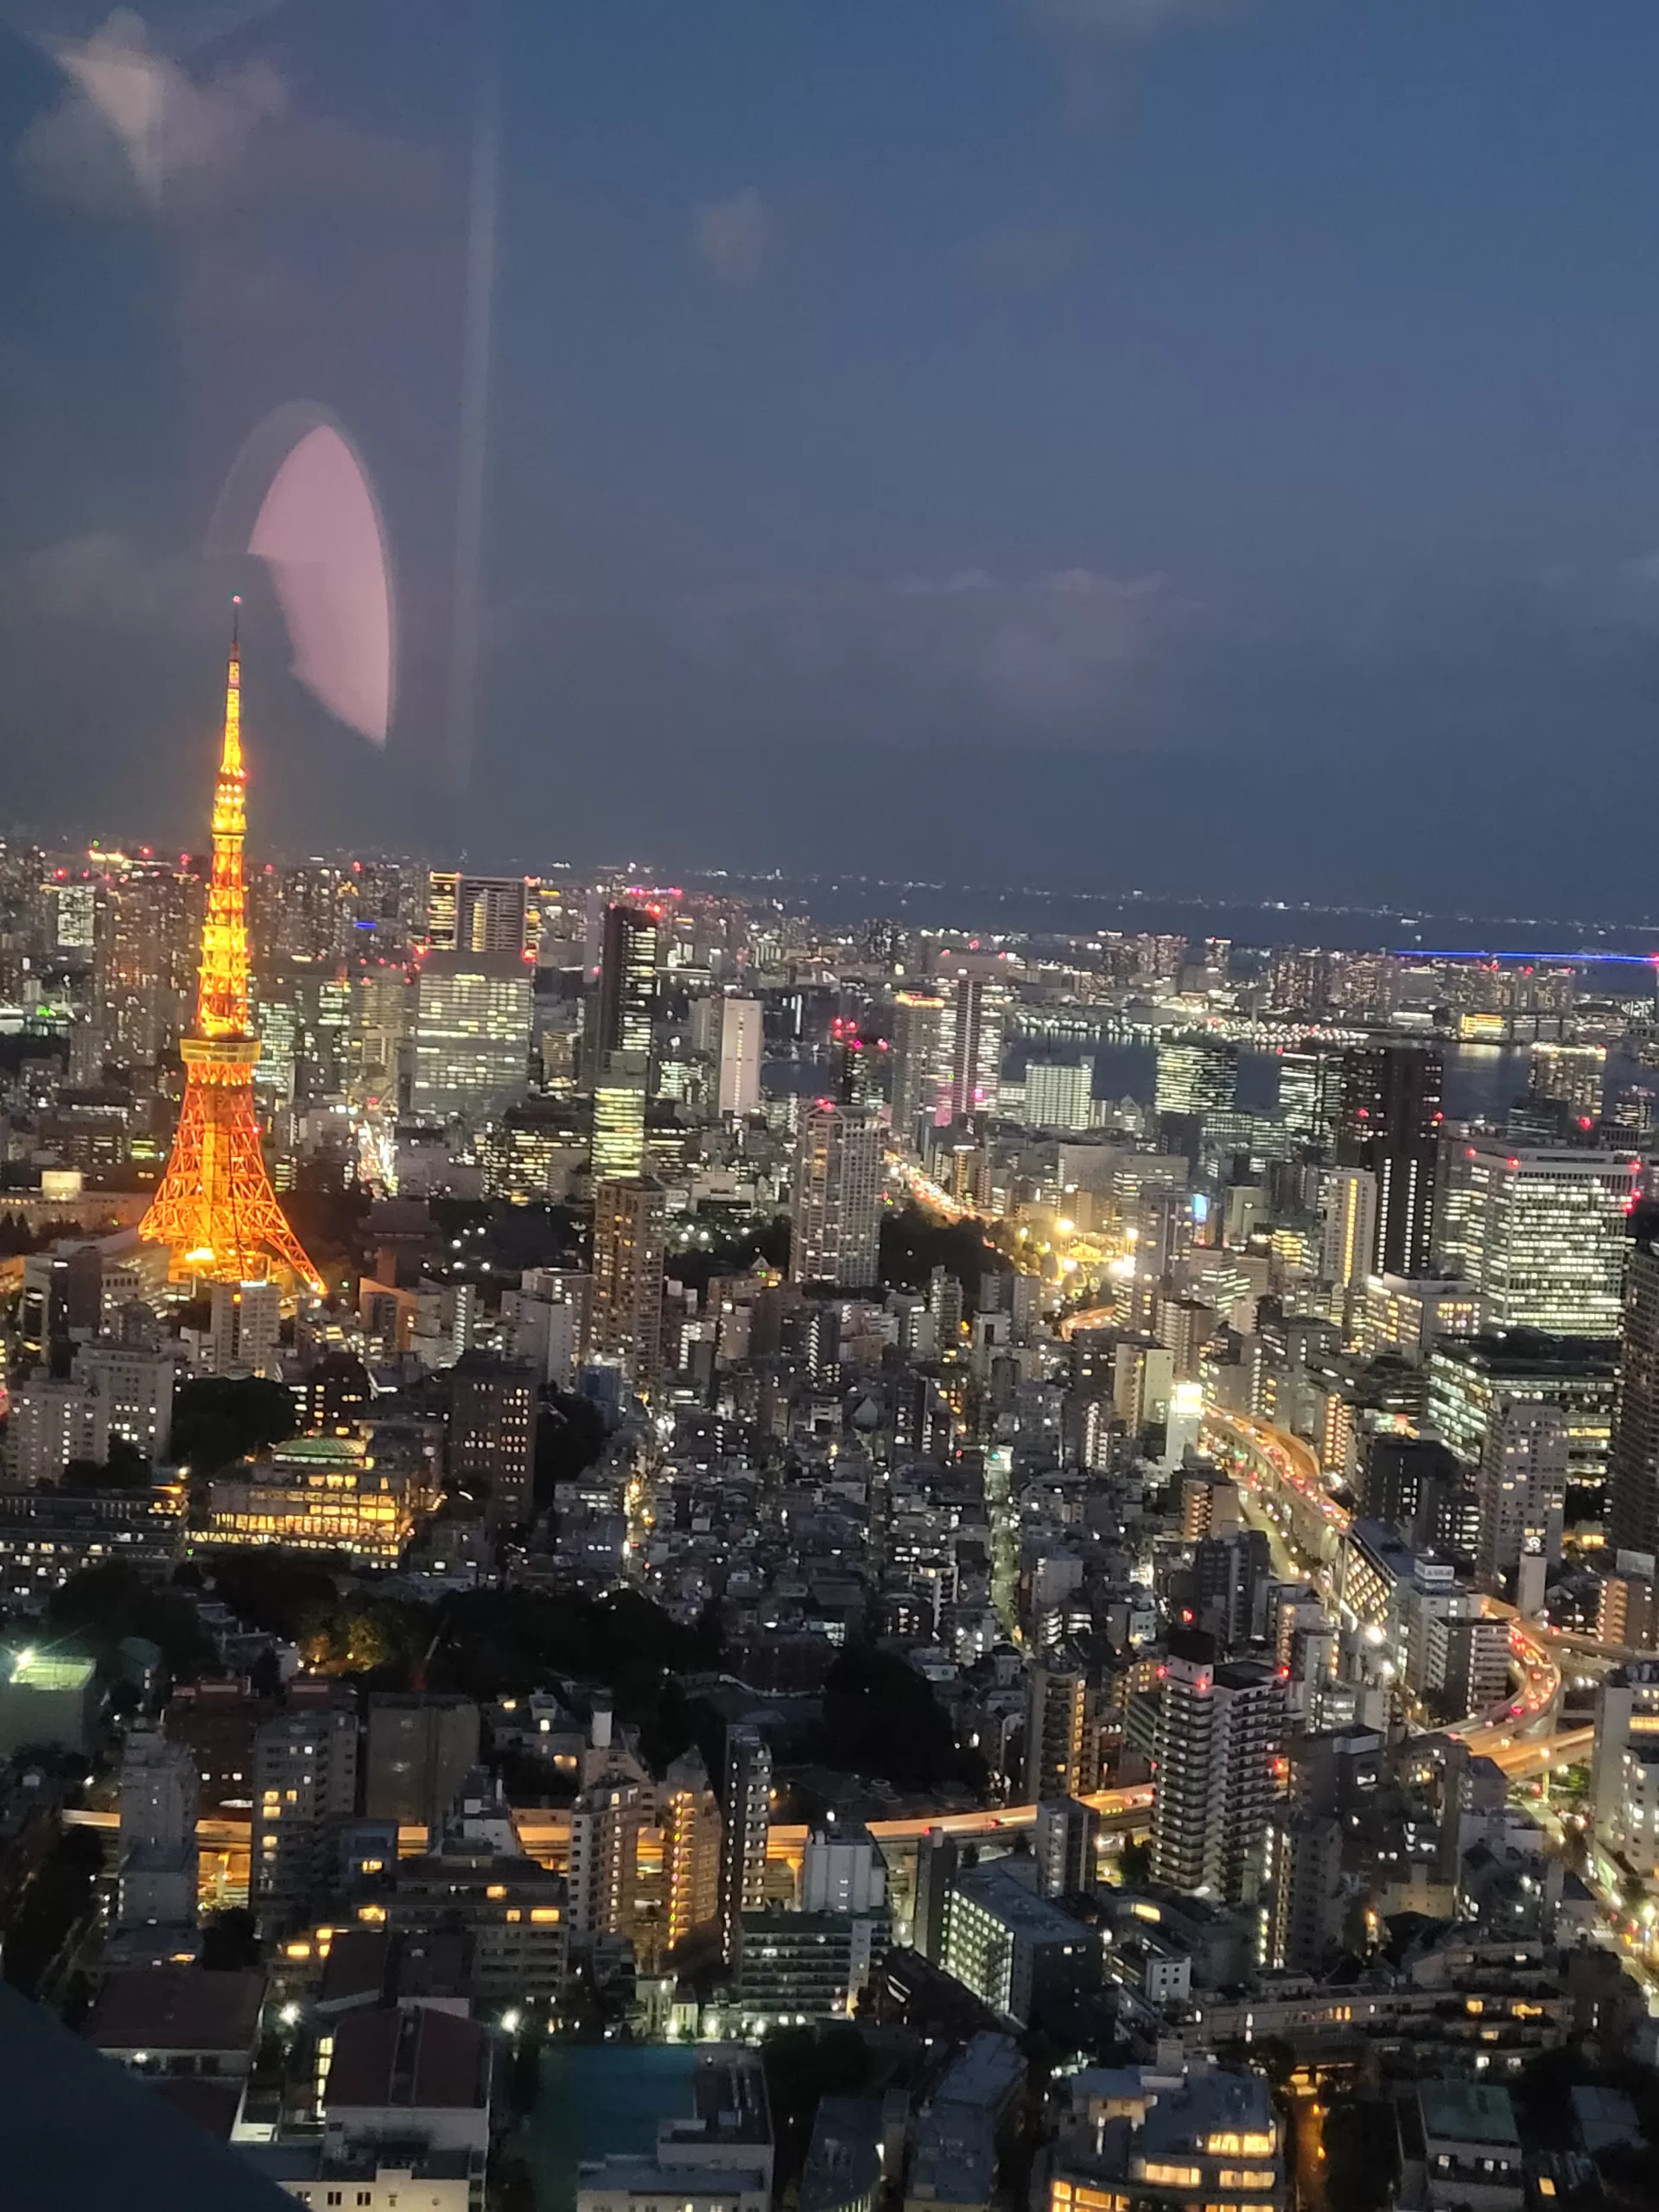 Roppongi – the uptown district that offers a luxurious experience